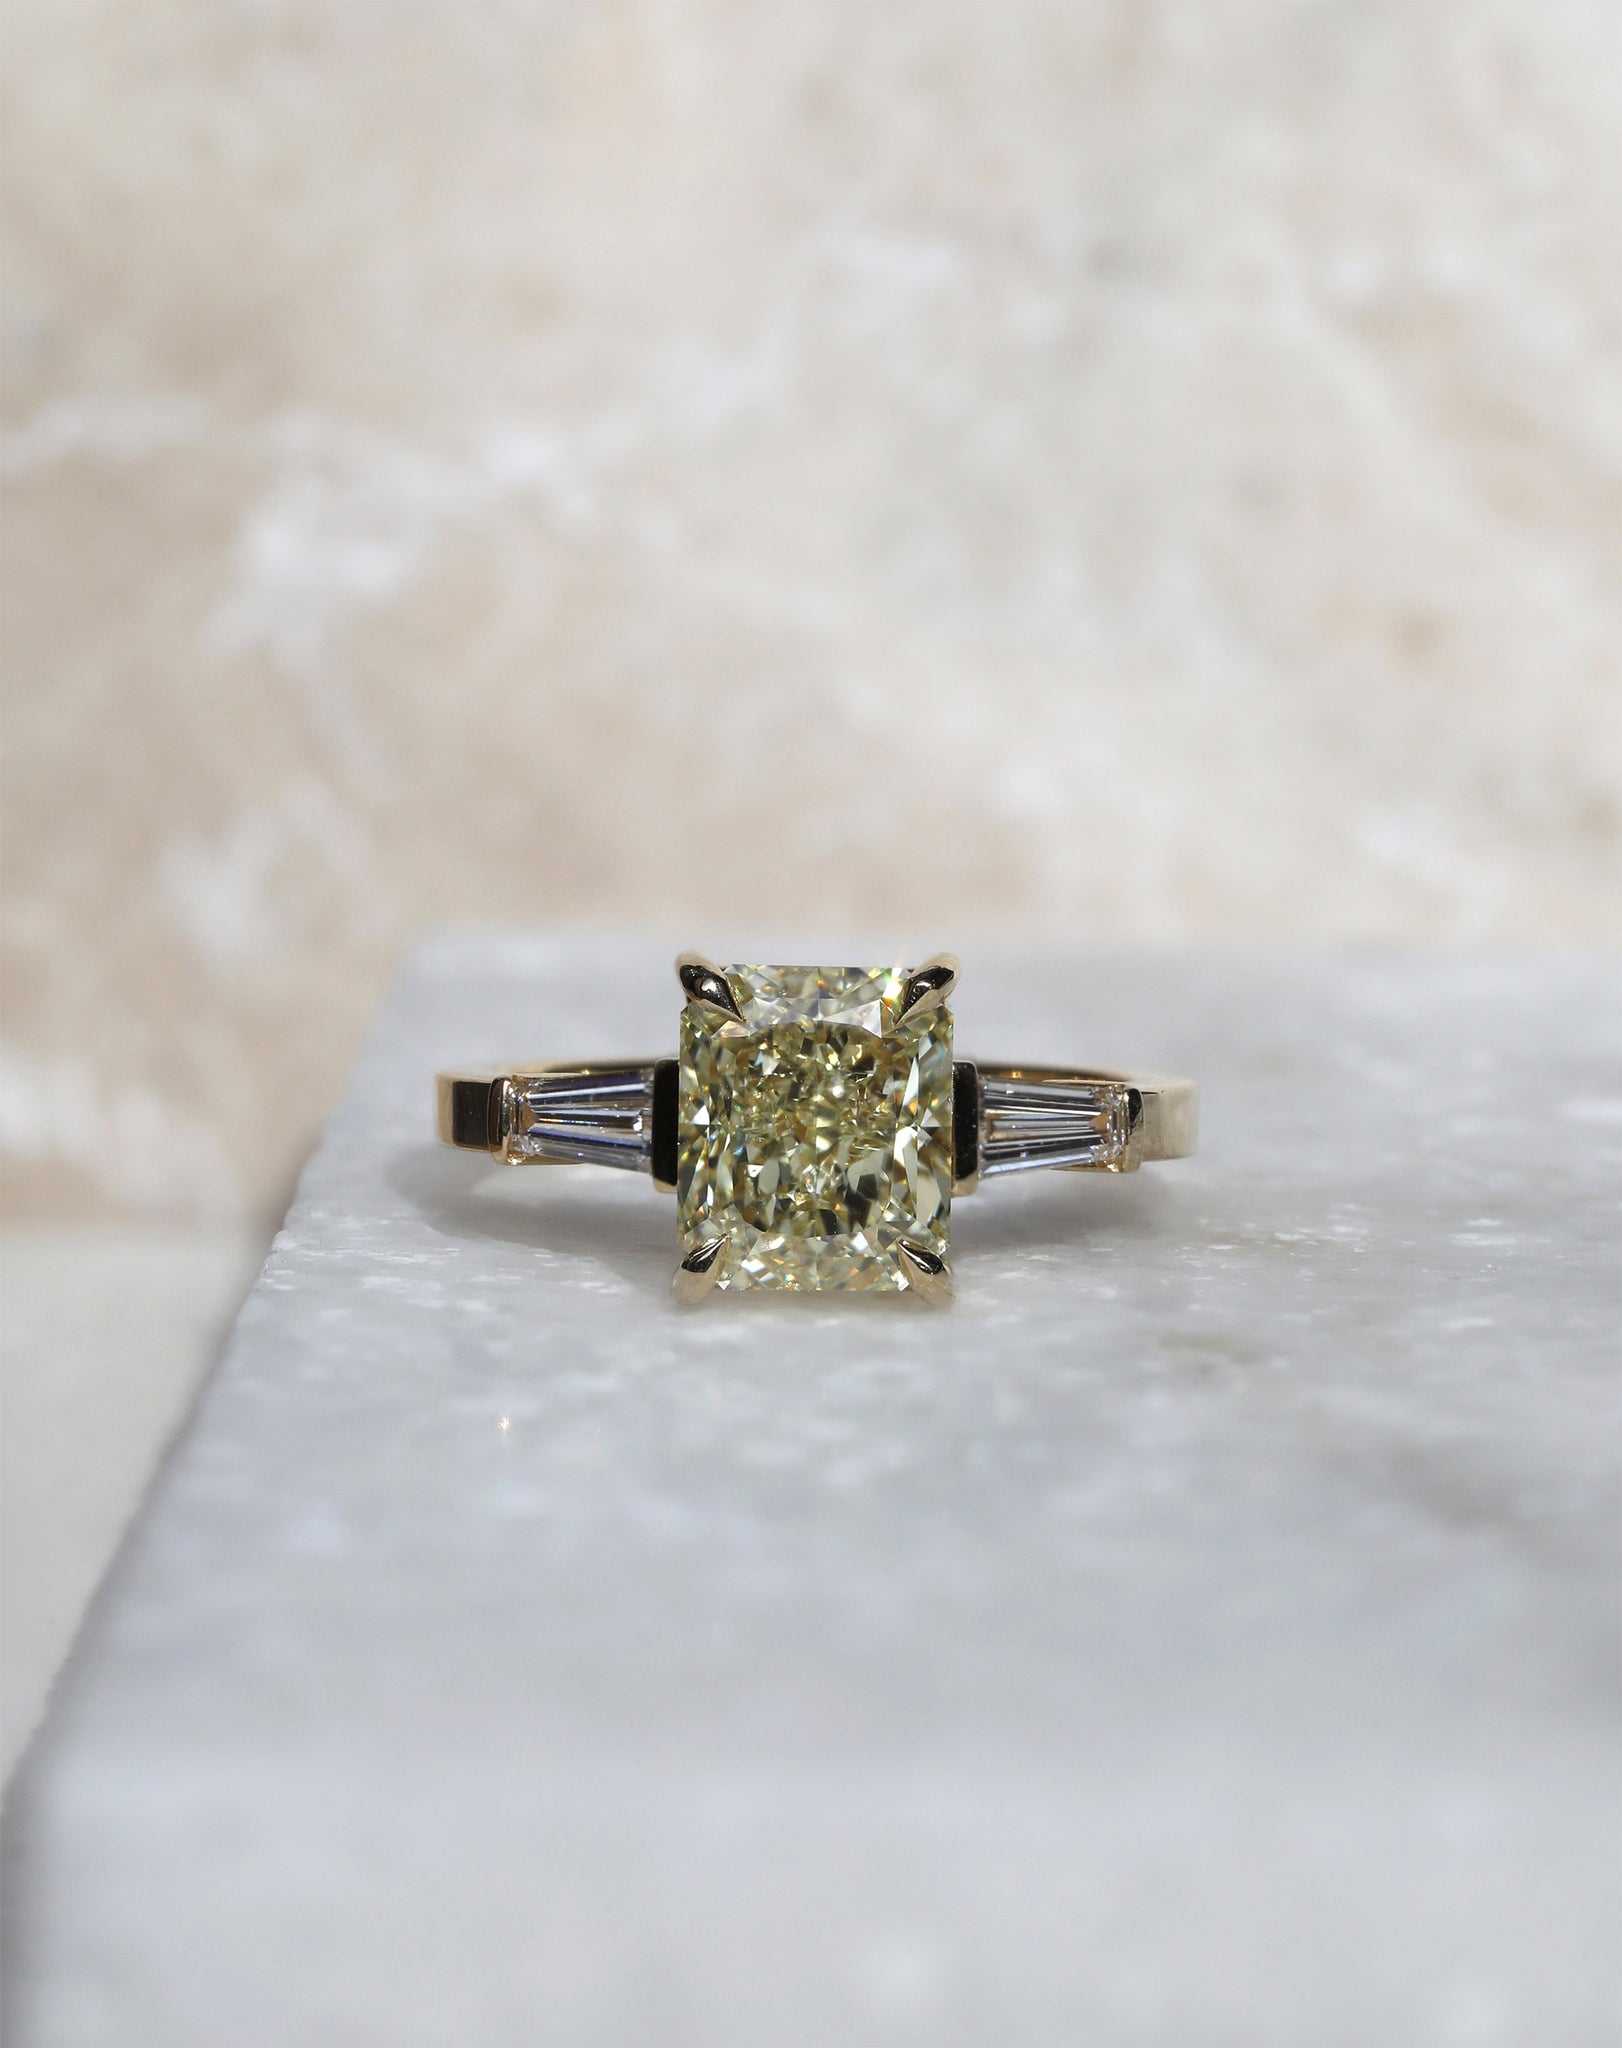 Radiant cut yellow diamond engagement ring. Handcrafted in London by east London jeweller Rachel Boston